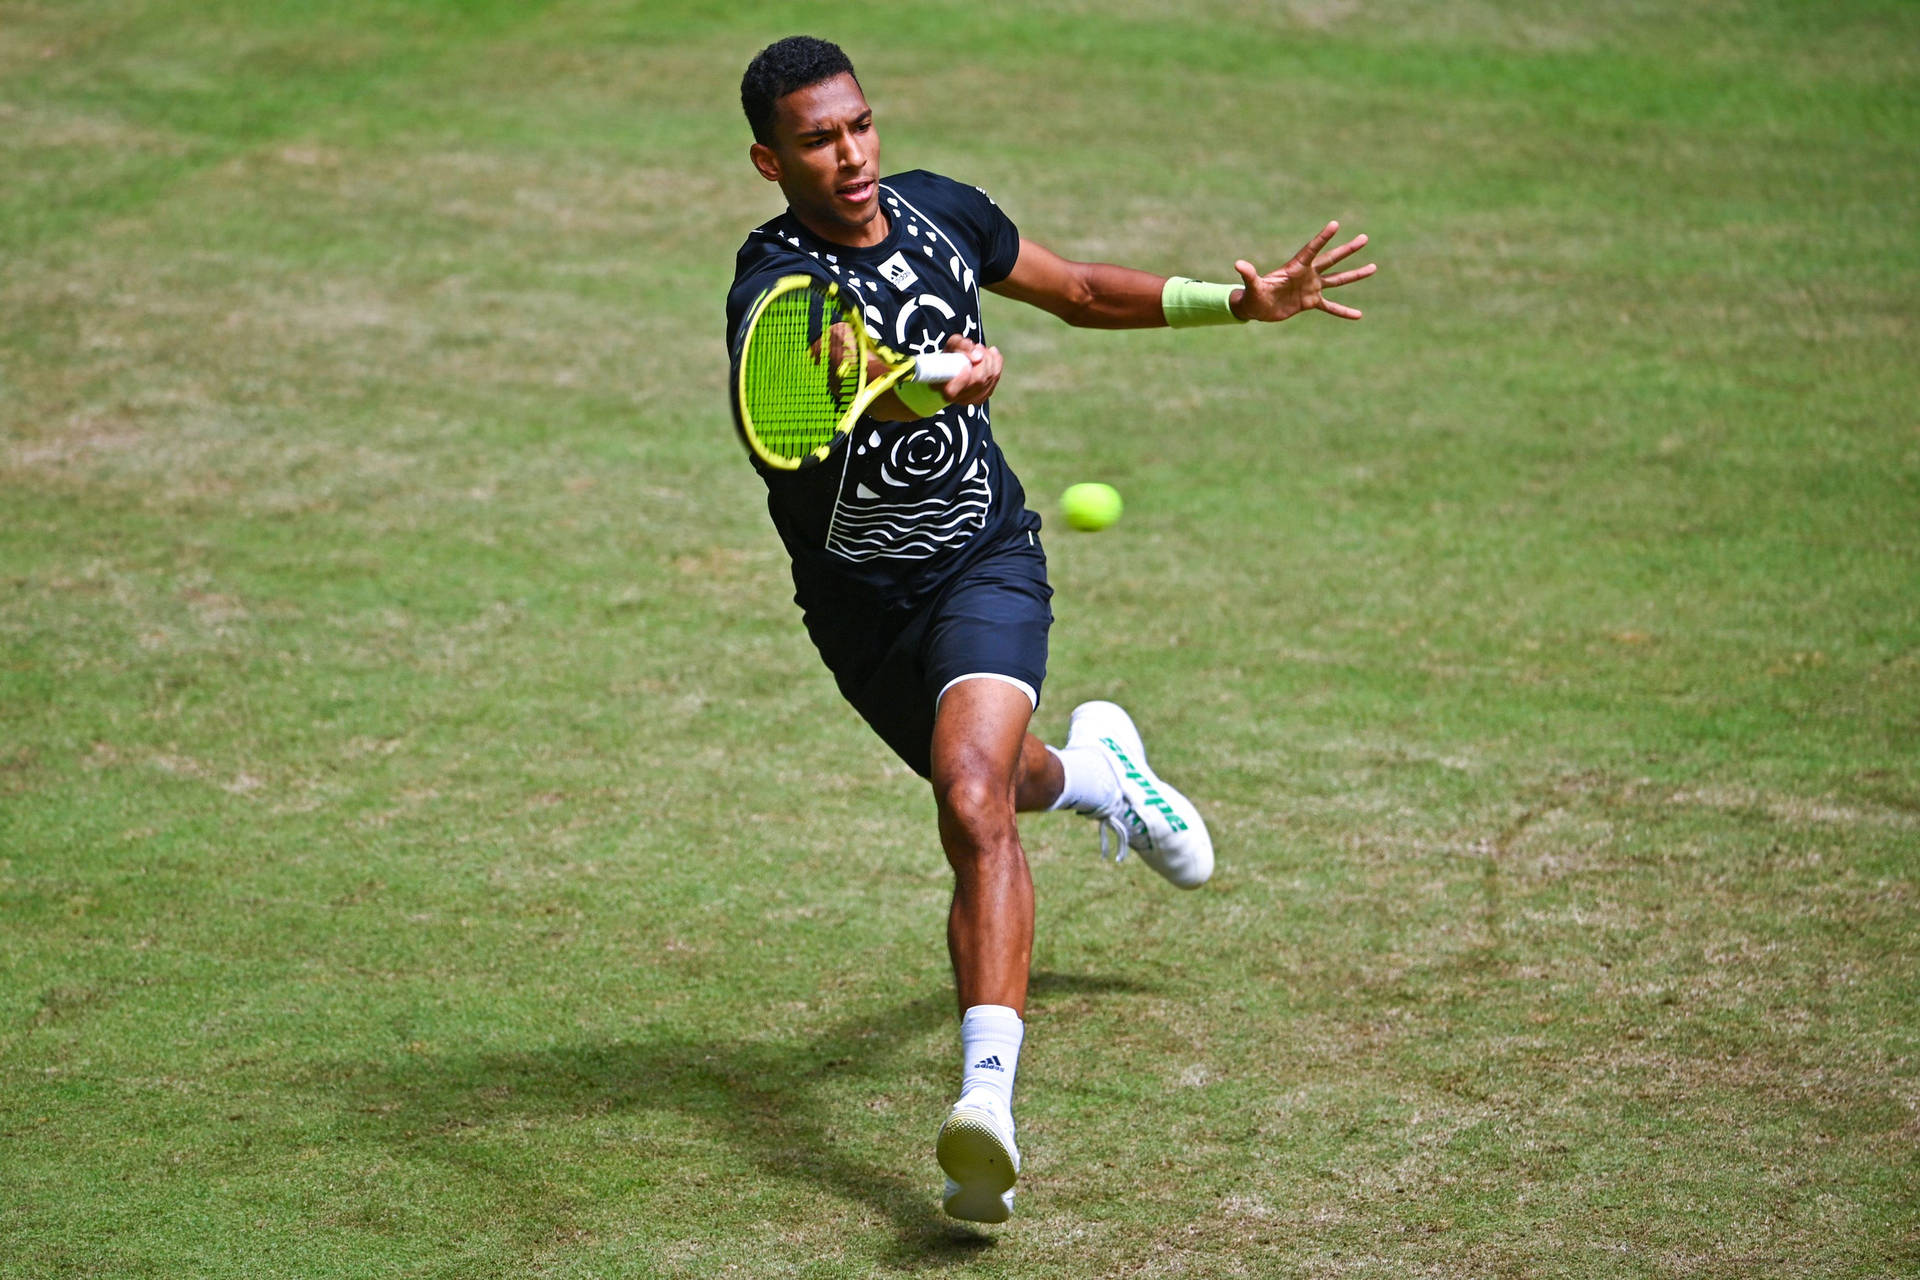 Felix Auger Aliassime in action on a grass court Wallpaper